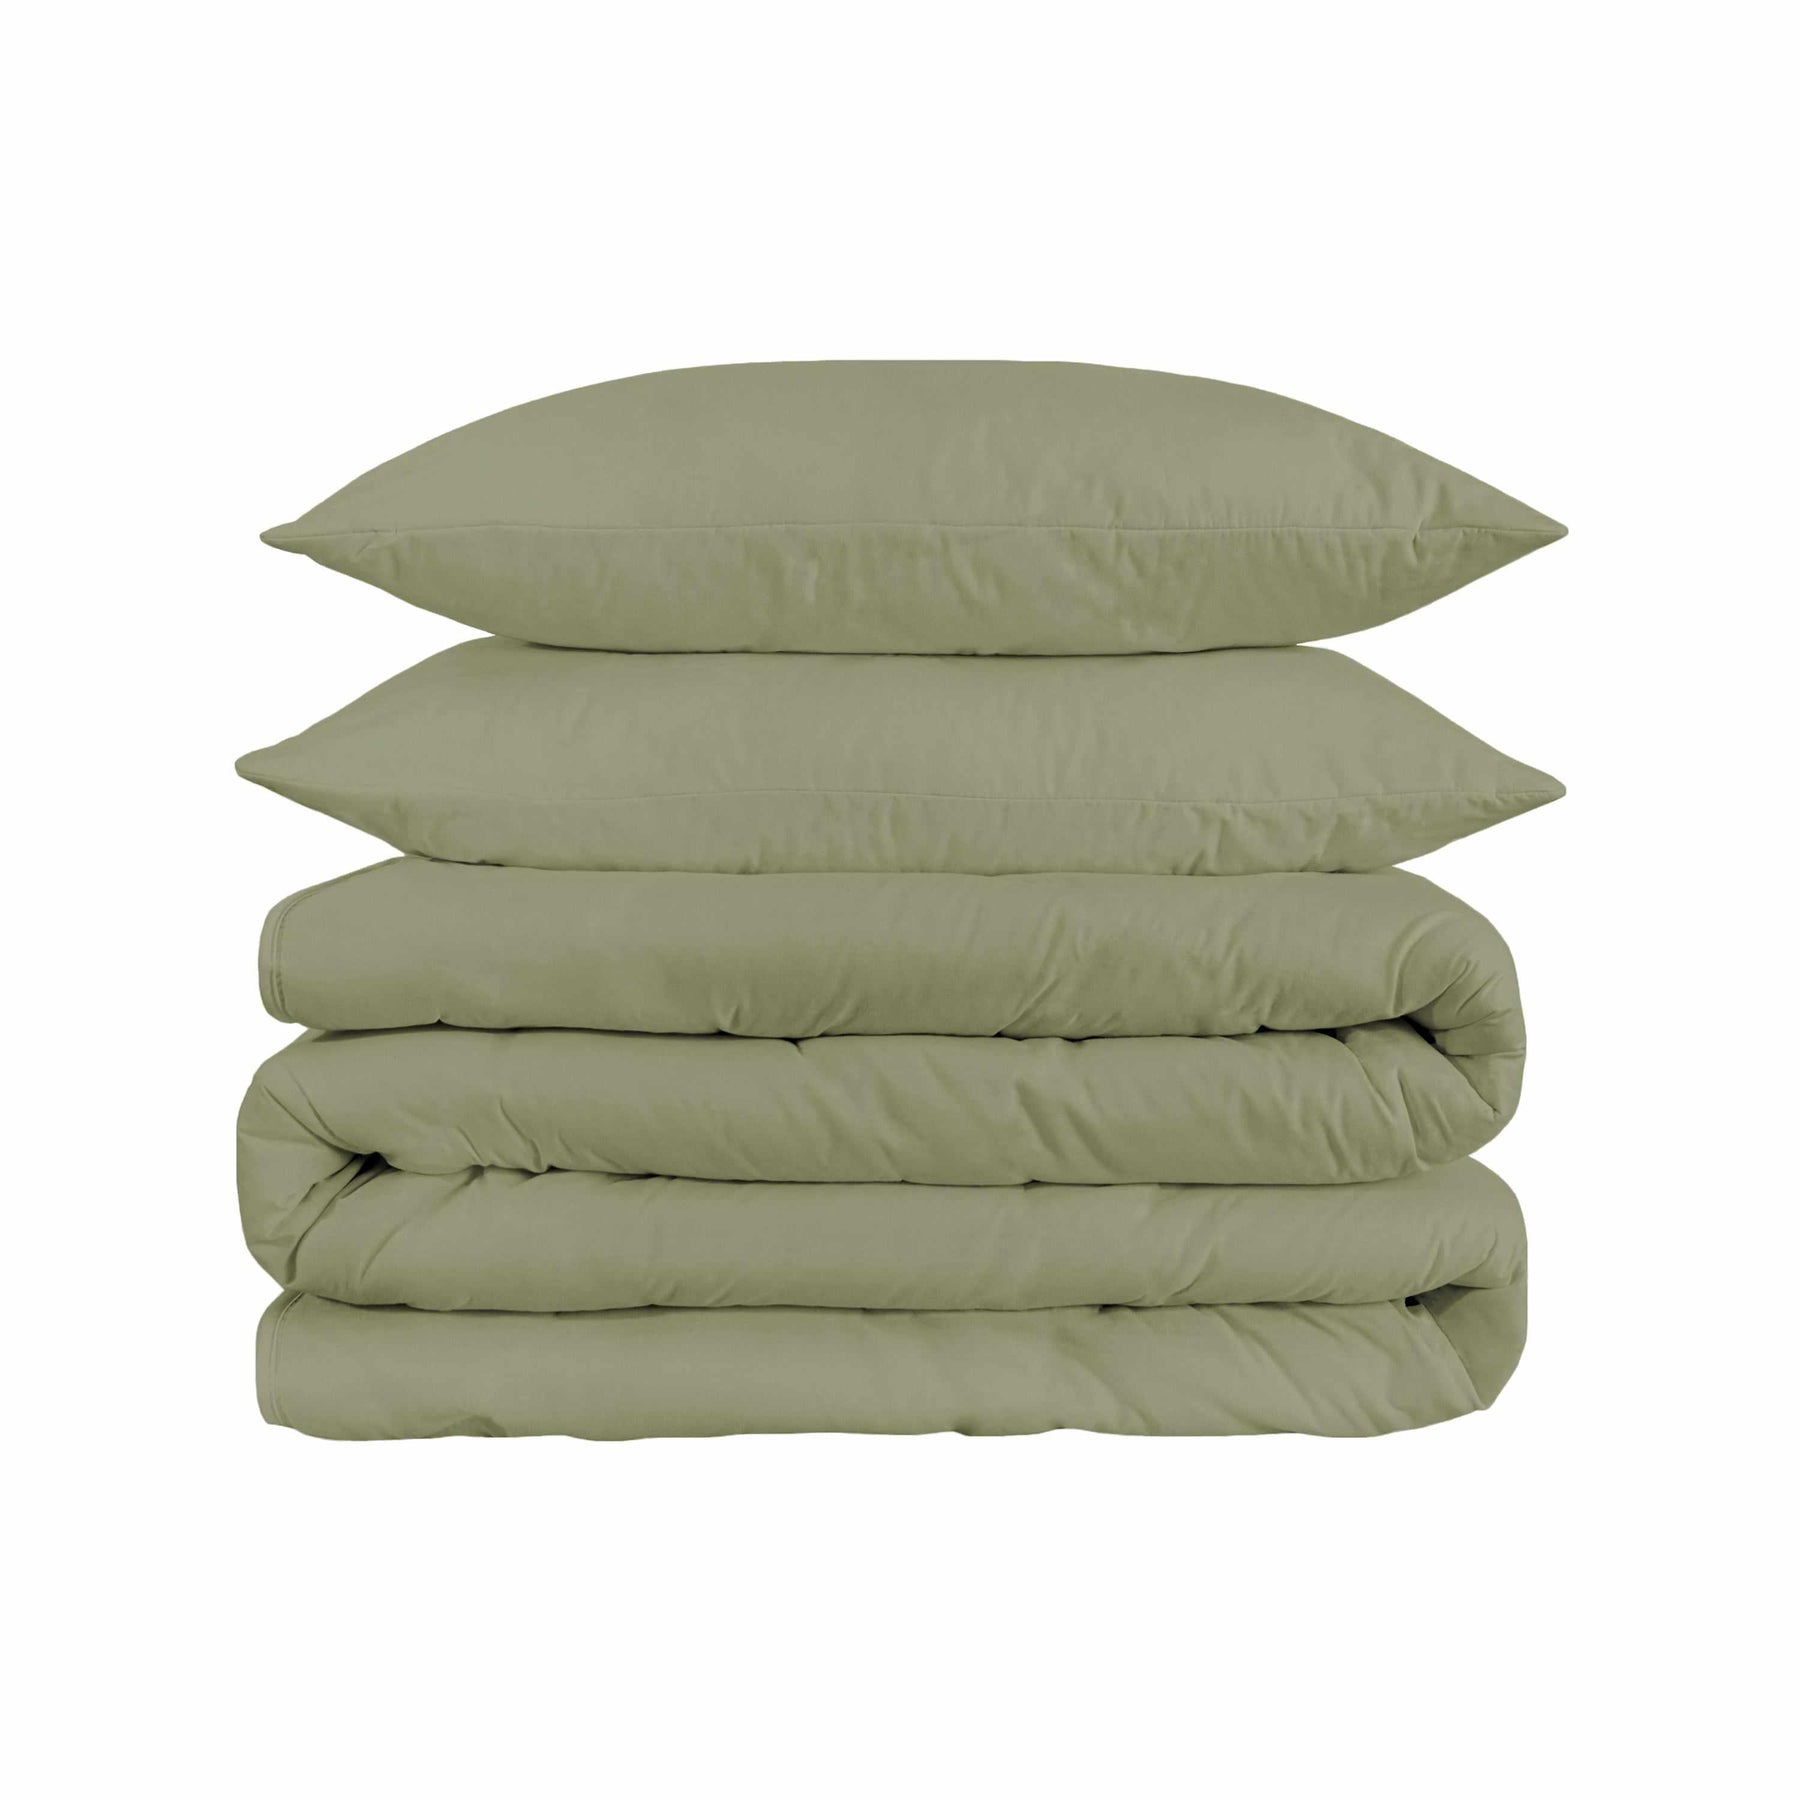 Superior Solid 1500 Thread Count Egyptian Cotton Duvet Cover Set - Sage